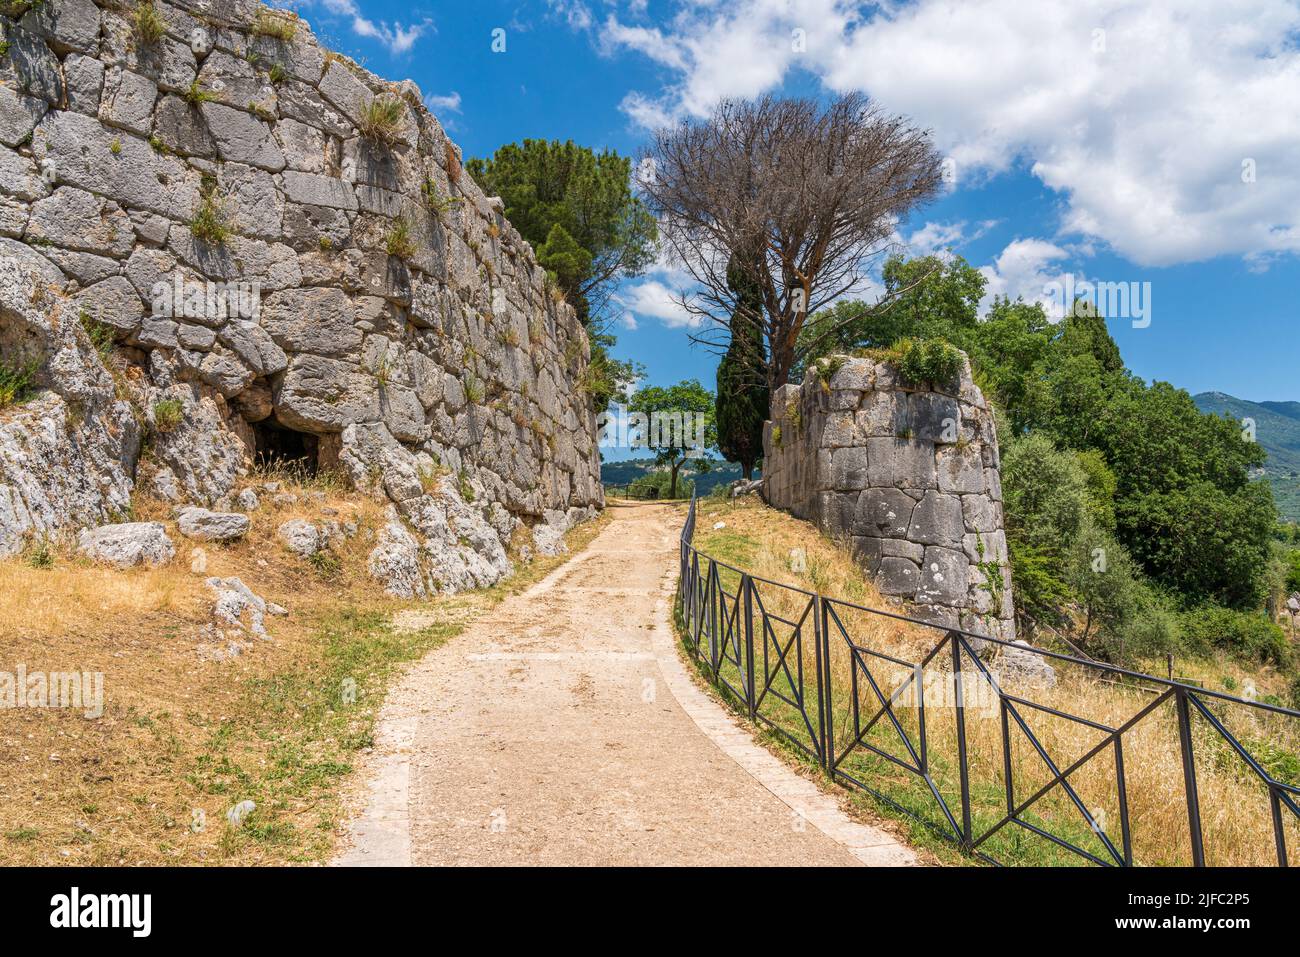 Norba, ancient town of Latium on the western edge of the Monti Lepini, Latina Province, Lazio, Italy Stock Photo